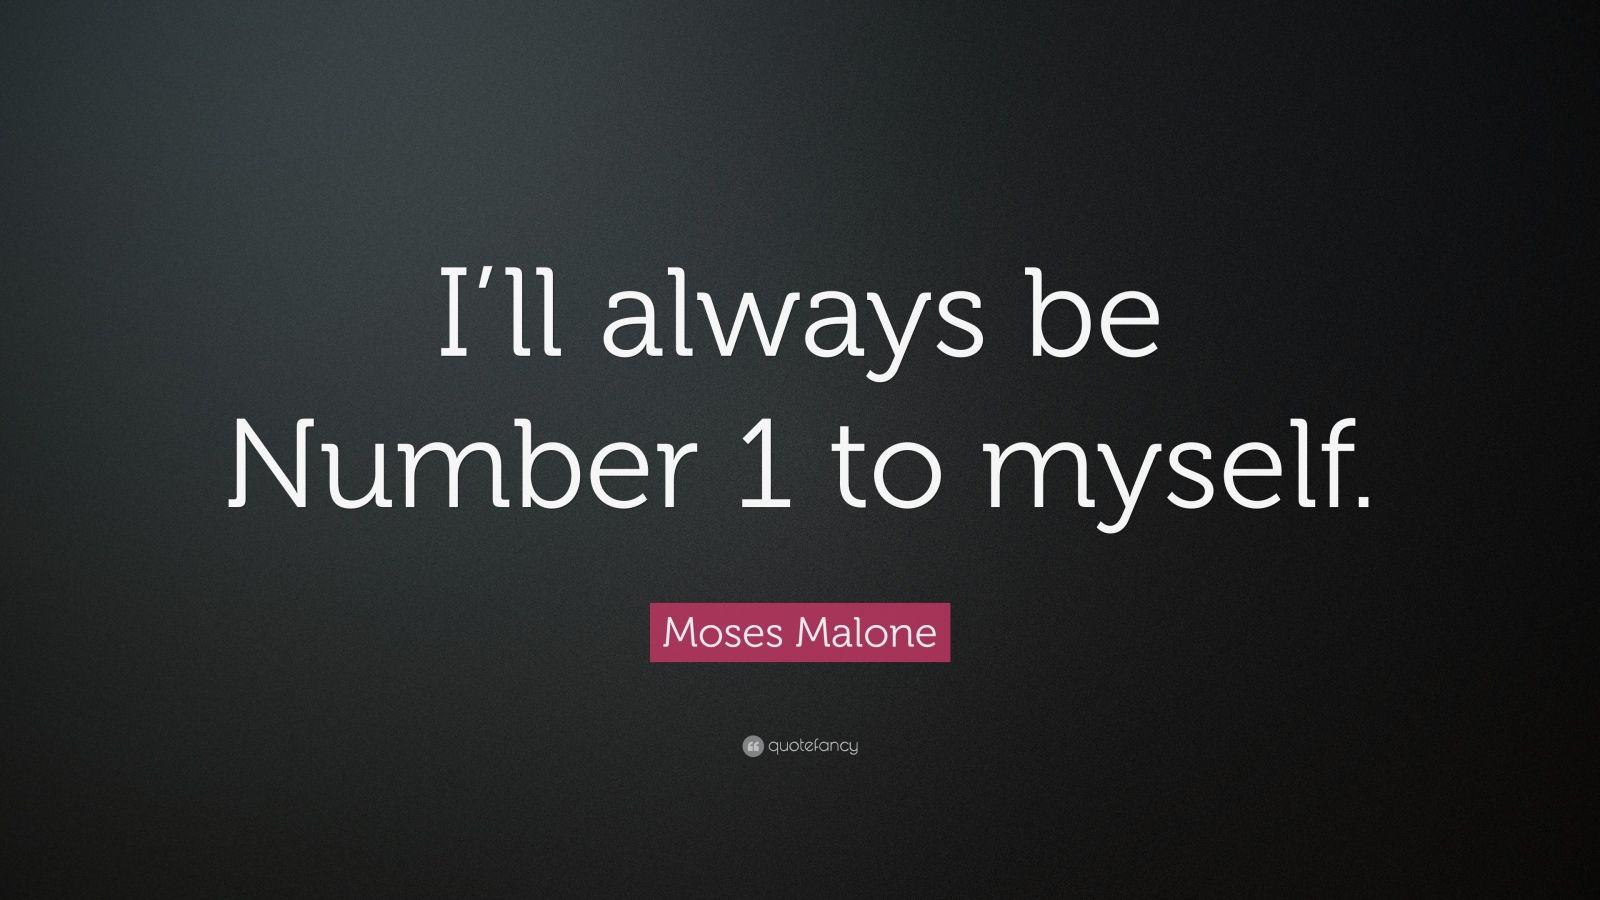 Moses Malone Quotes (24 wallpaper)